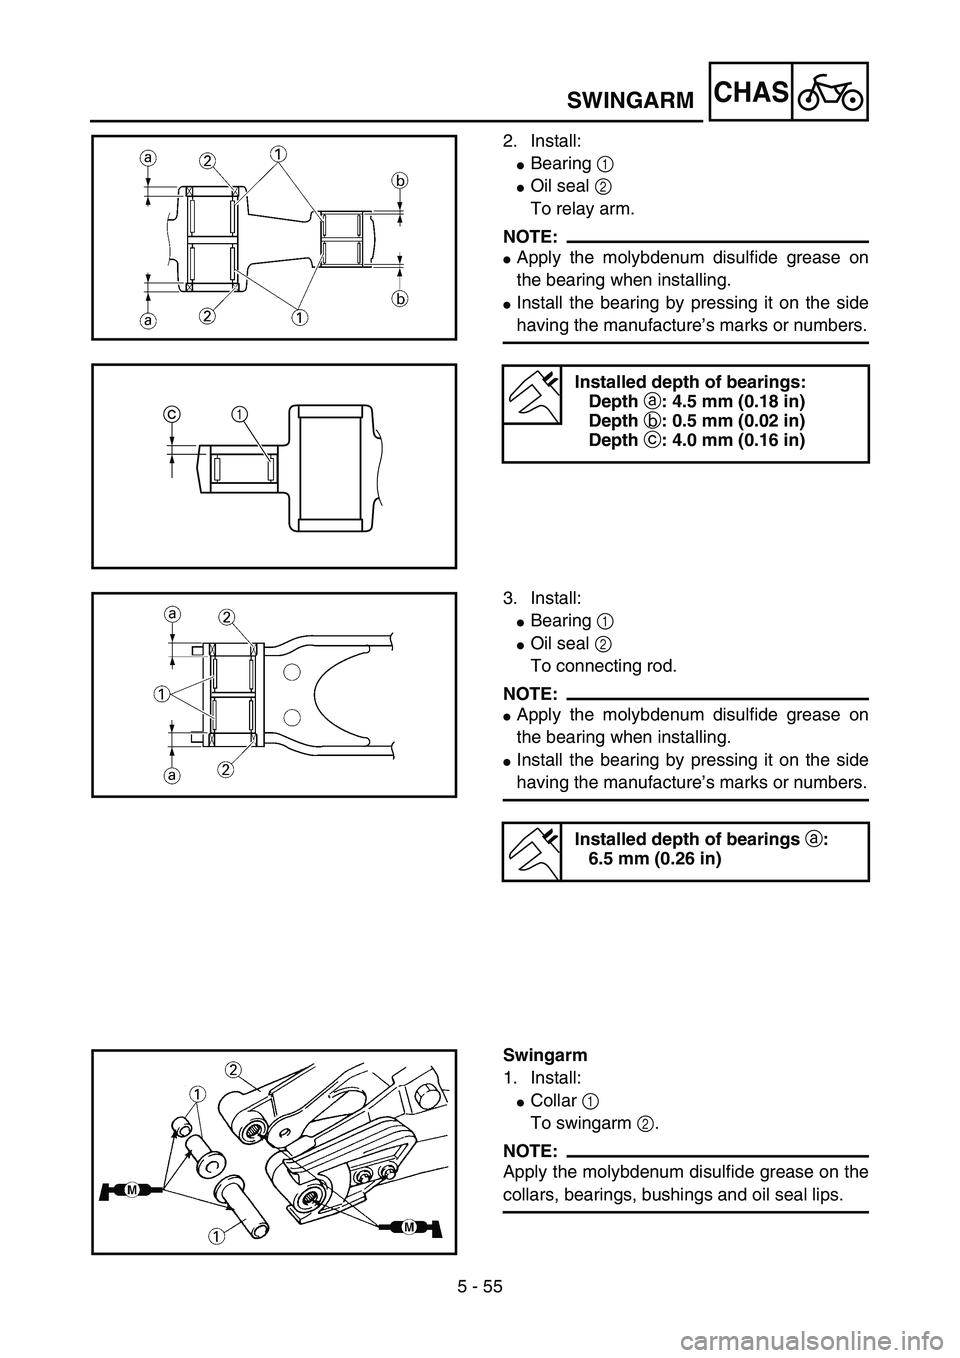 YAMAHA YZ85 2006  Owners Manual 5 - 55
CHAS
2. Install:
Bearing 1 
Oil seal 2 
To relay arm.
NOTE:
Apply the molybdenum disulfide grease on
the bearing when installing.
Install the bearing by pressing it on the side
having the m